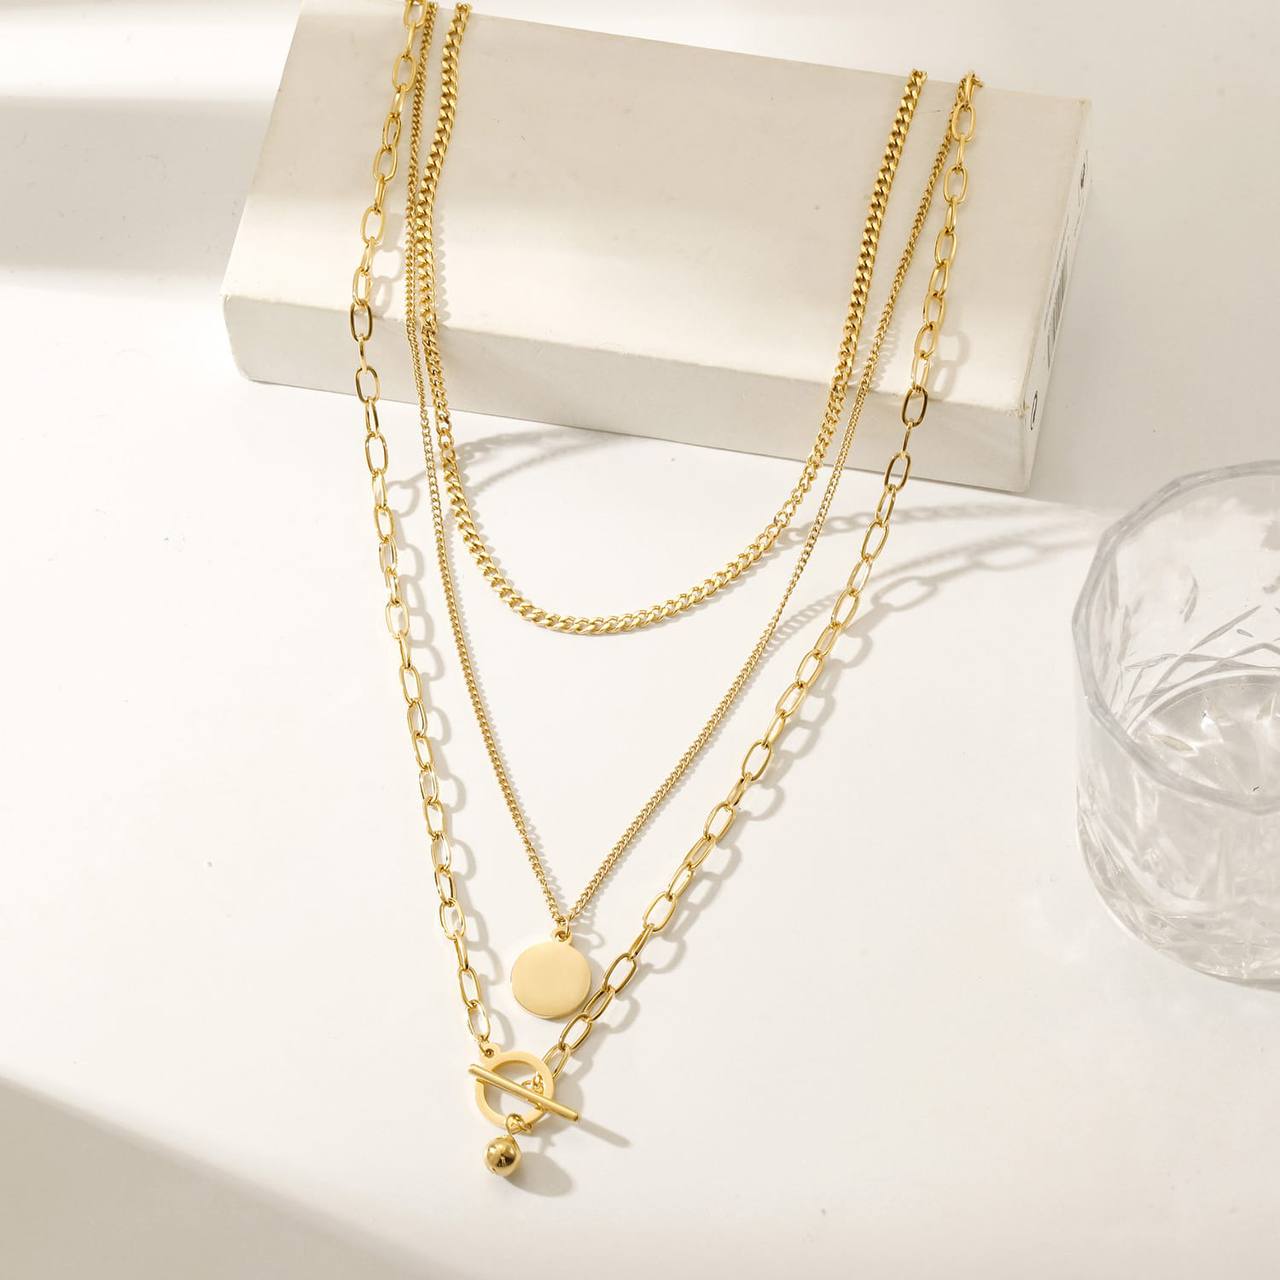 Multilayer Stainless steel necklace